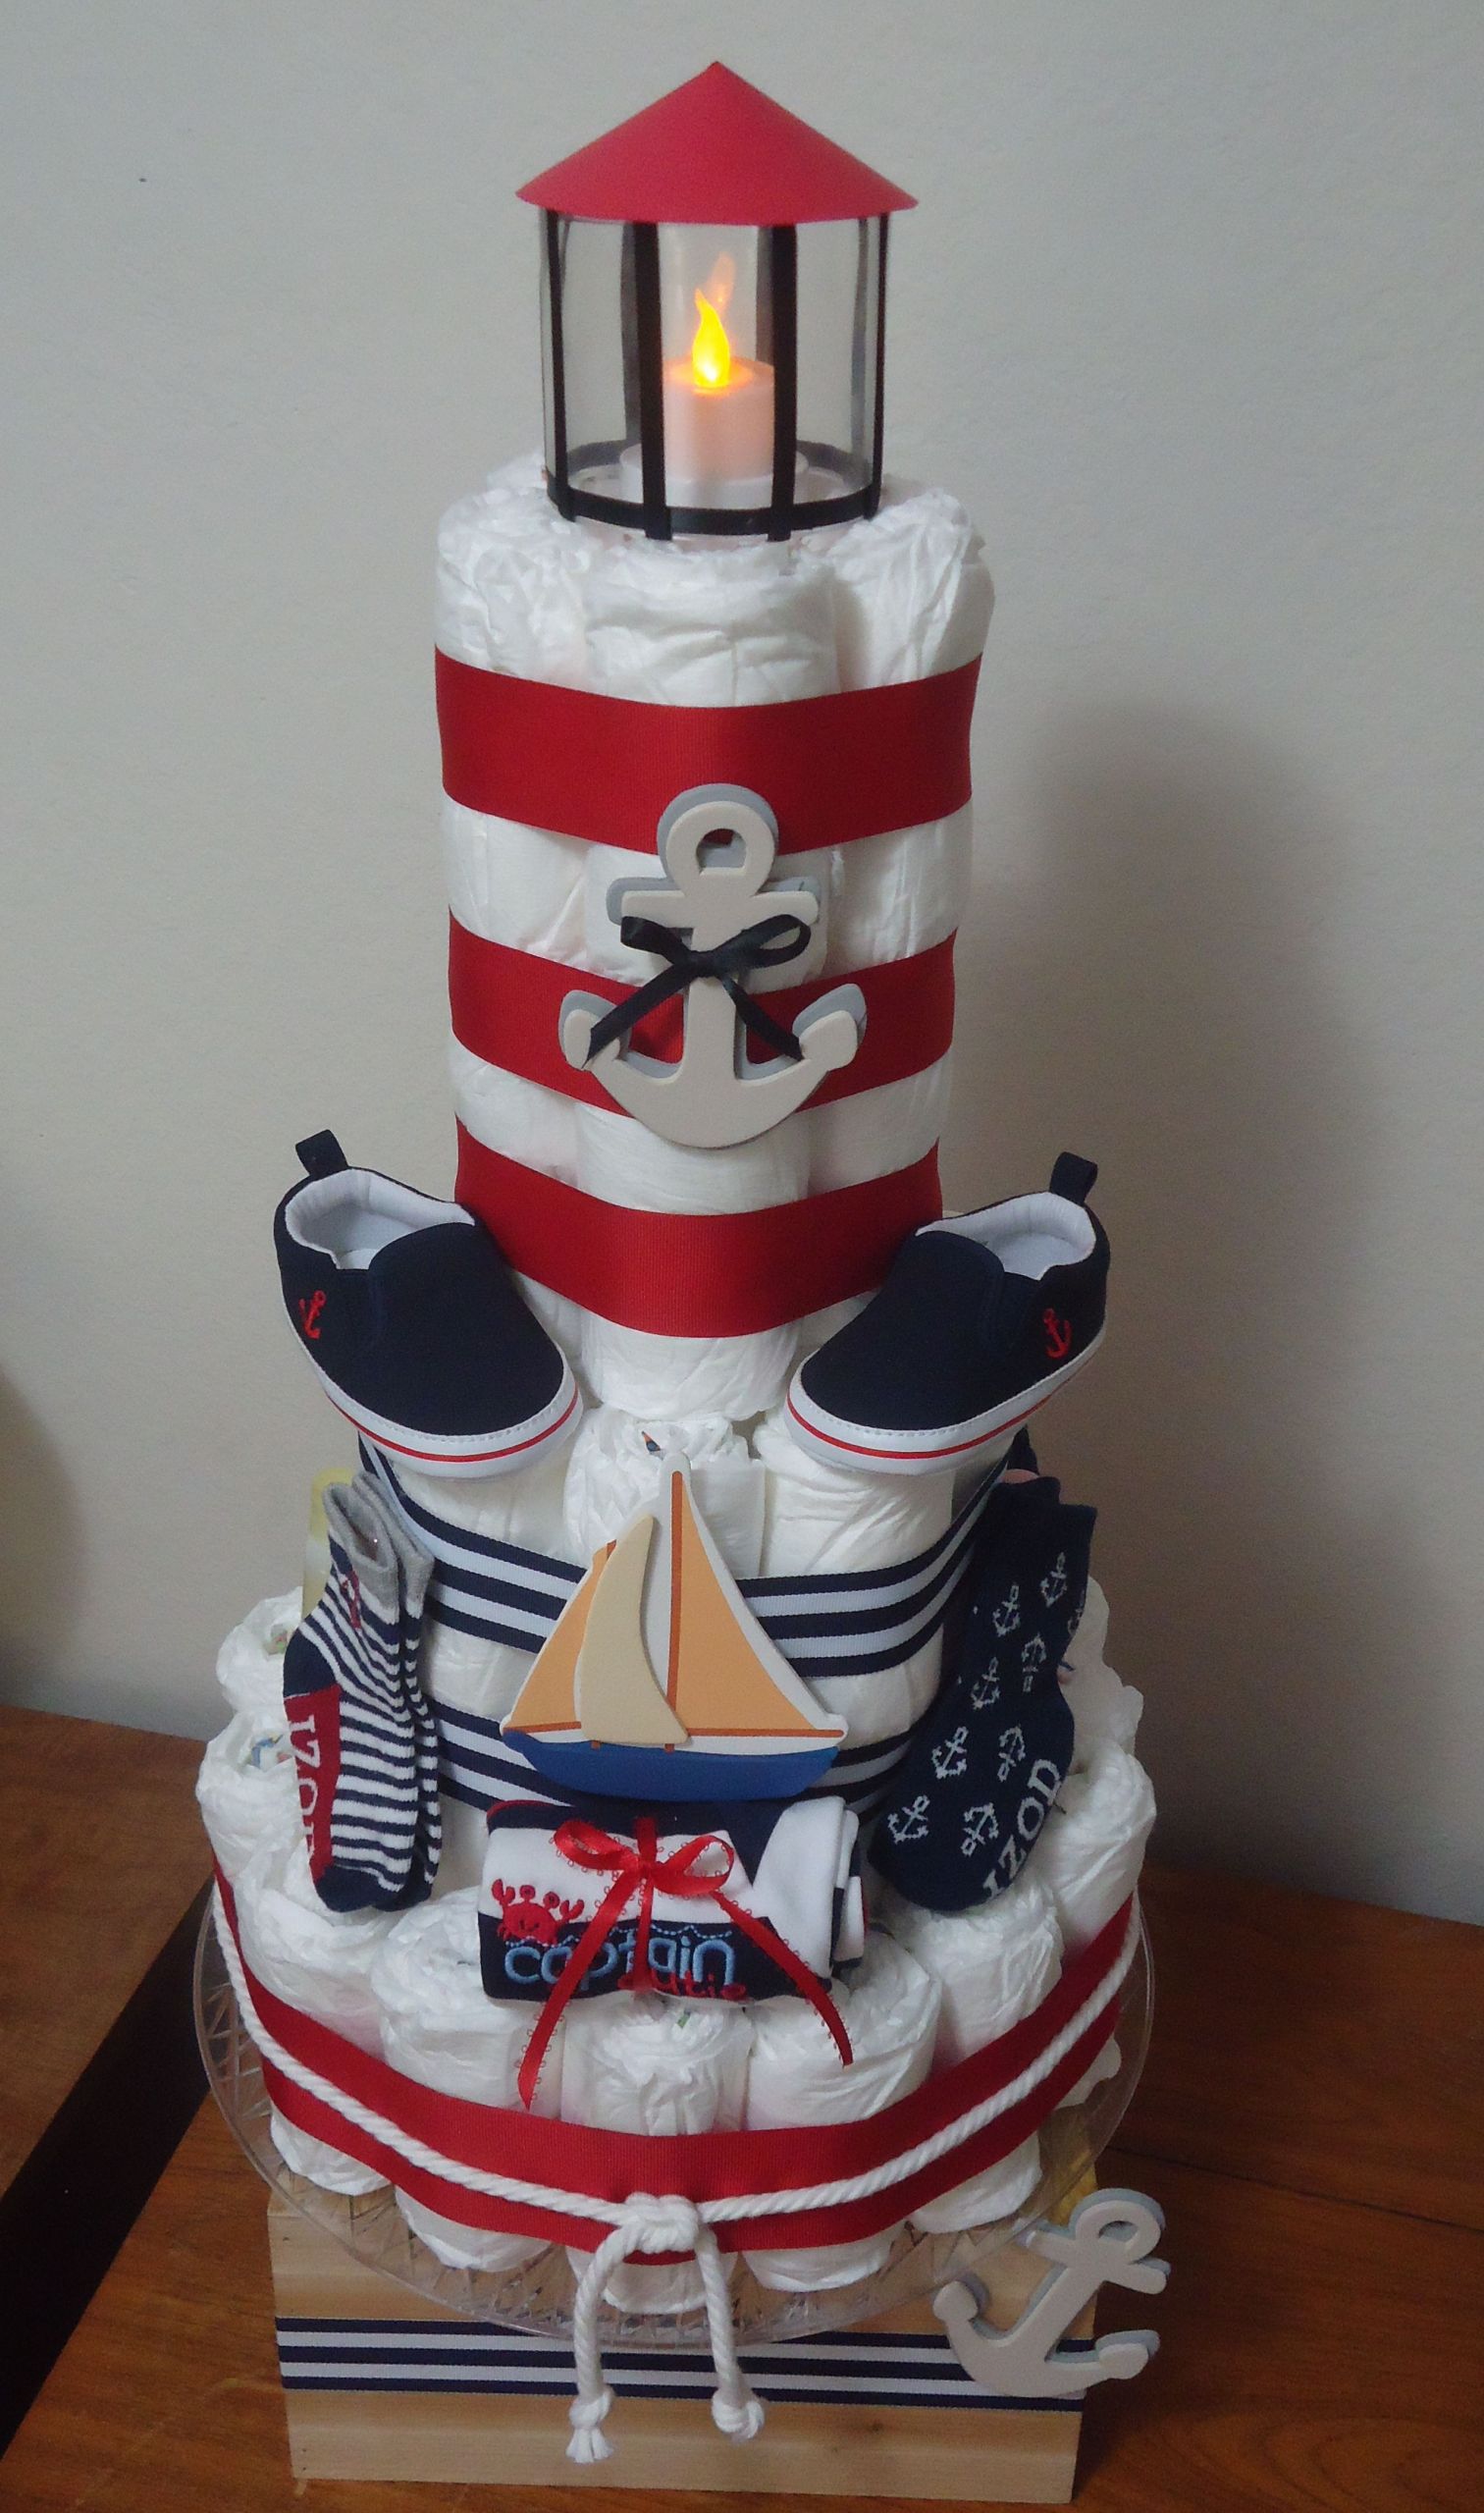 Nautical Baby Shower Gift Ideas
 Nautical Diaper Cake With a real working tea light